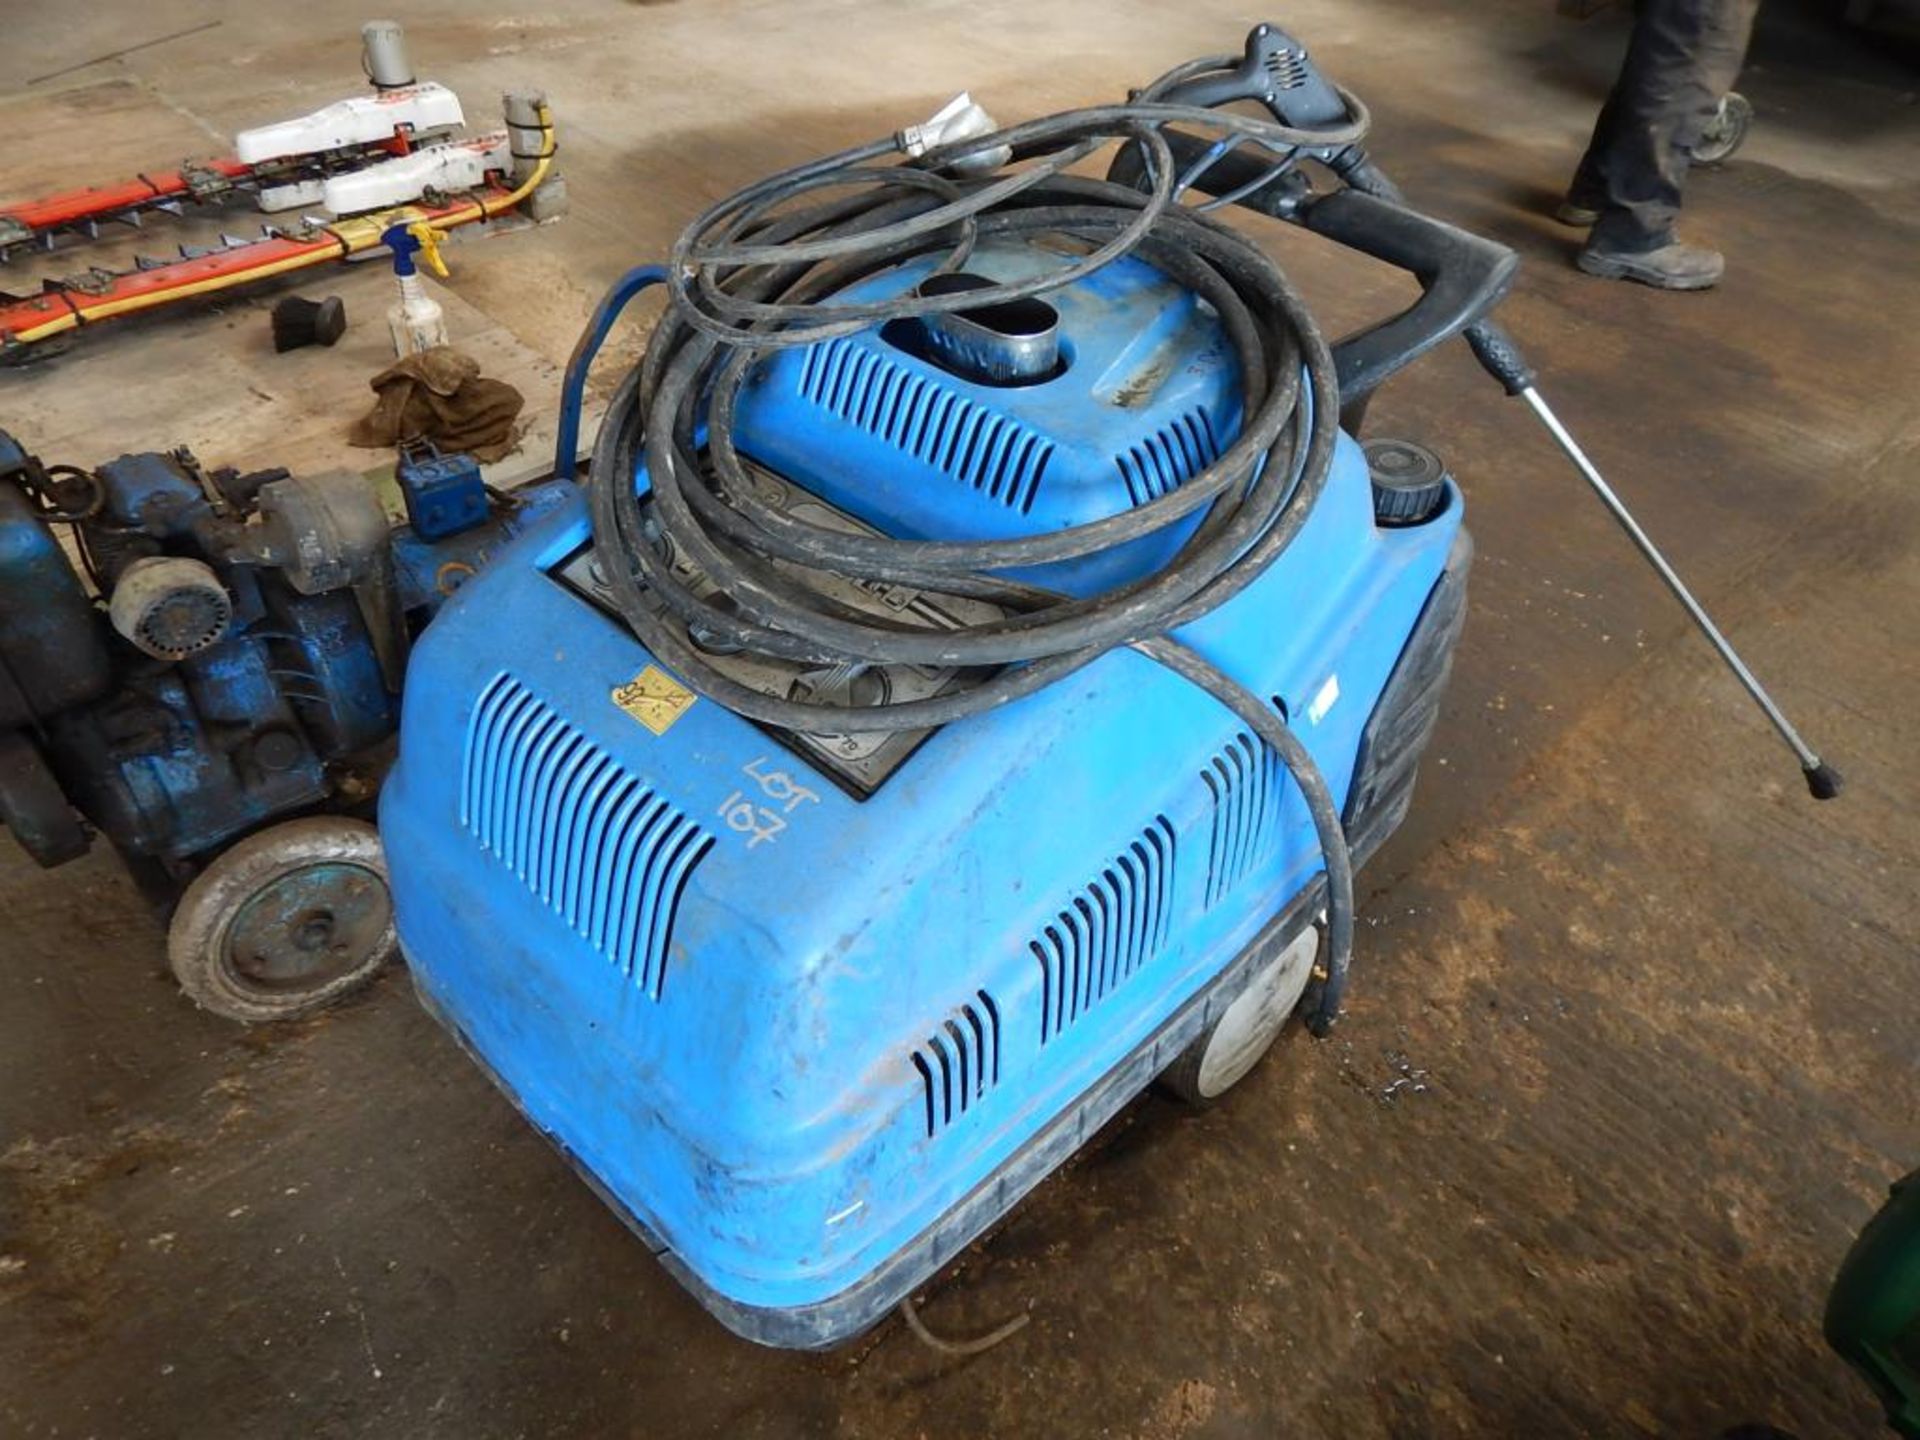 Hot/cold pressure washer, 3phase